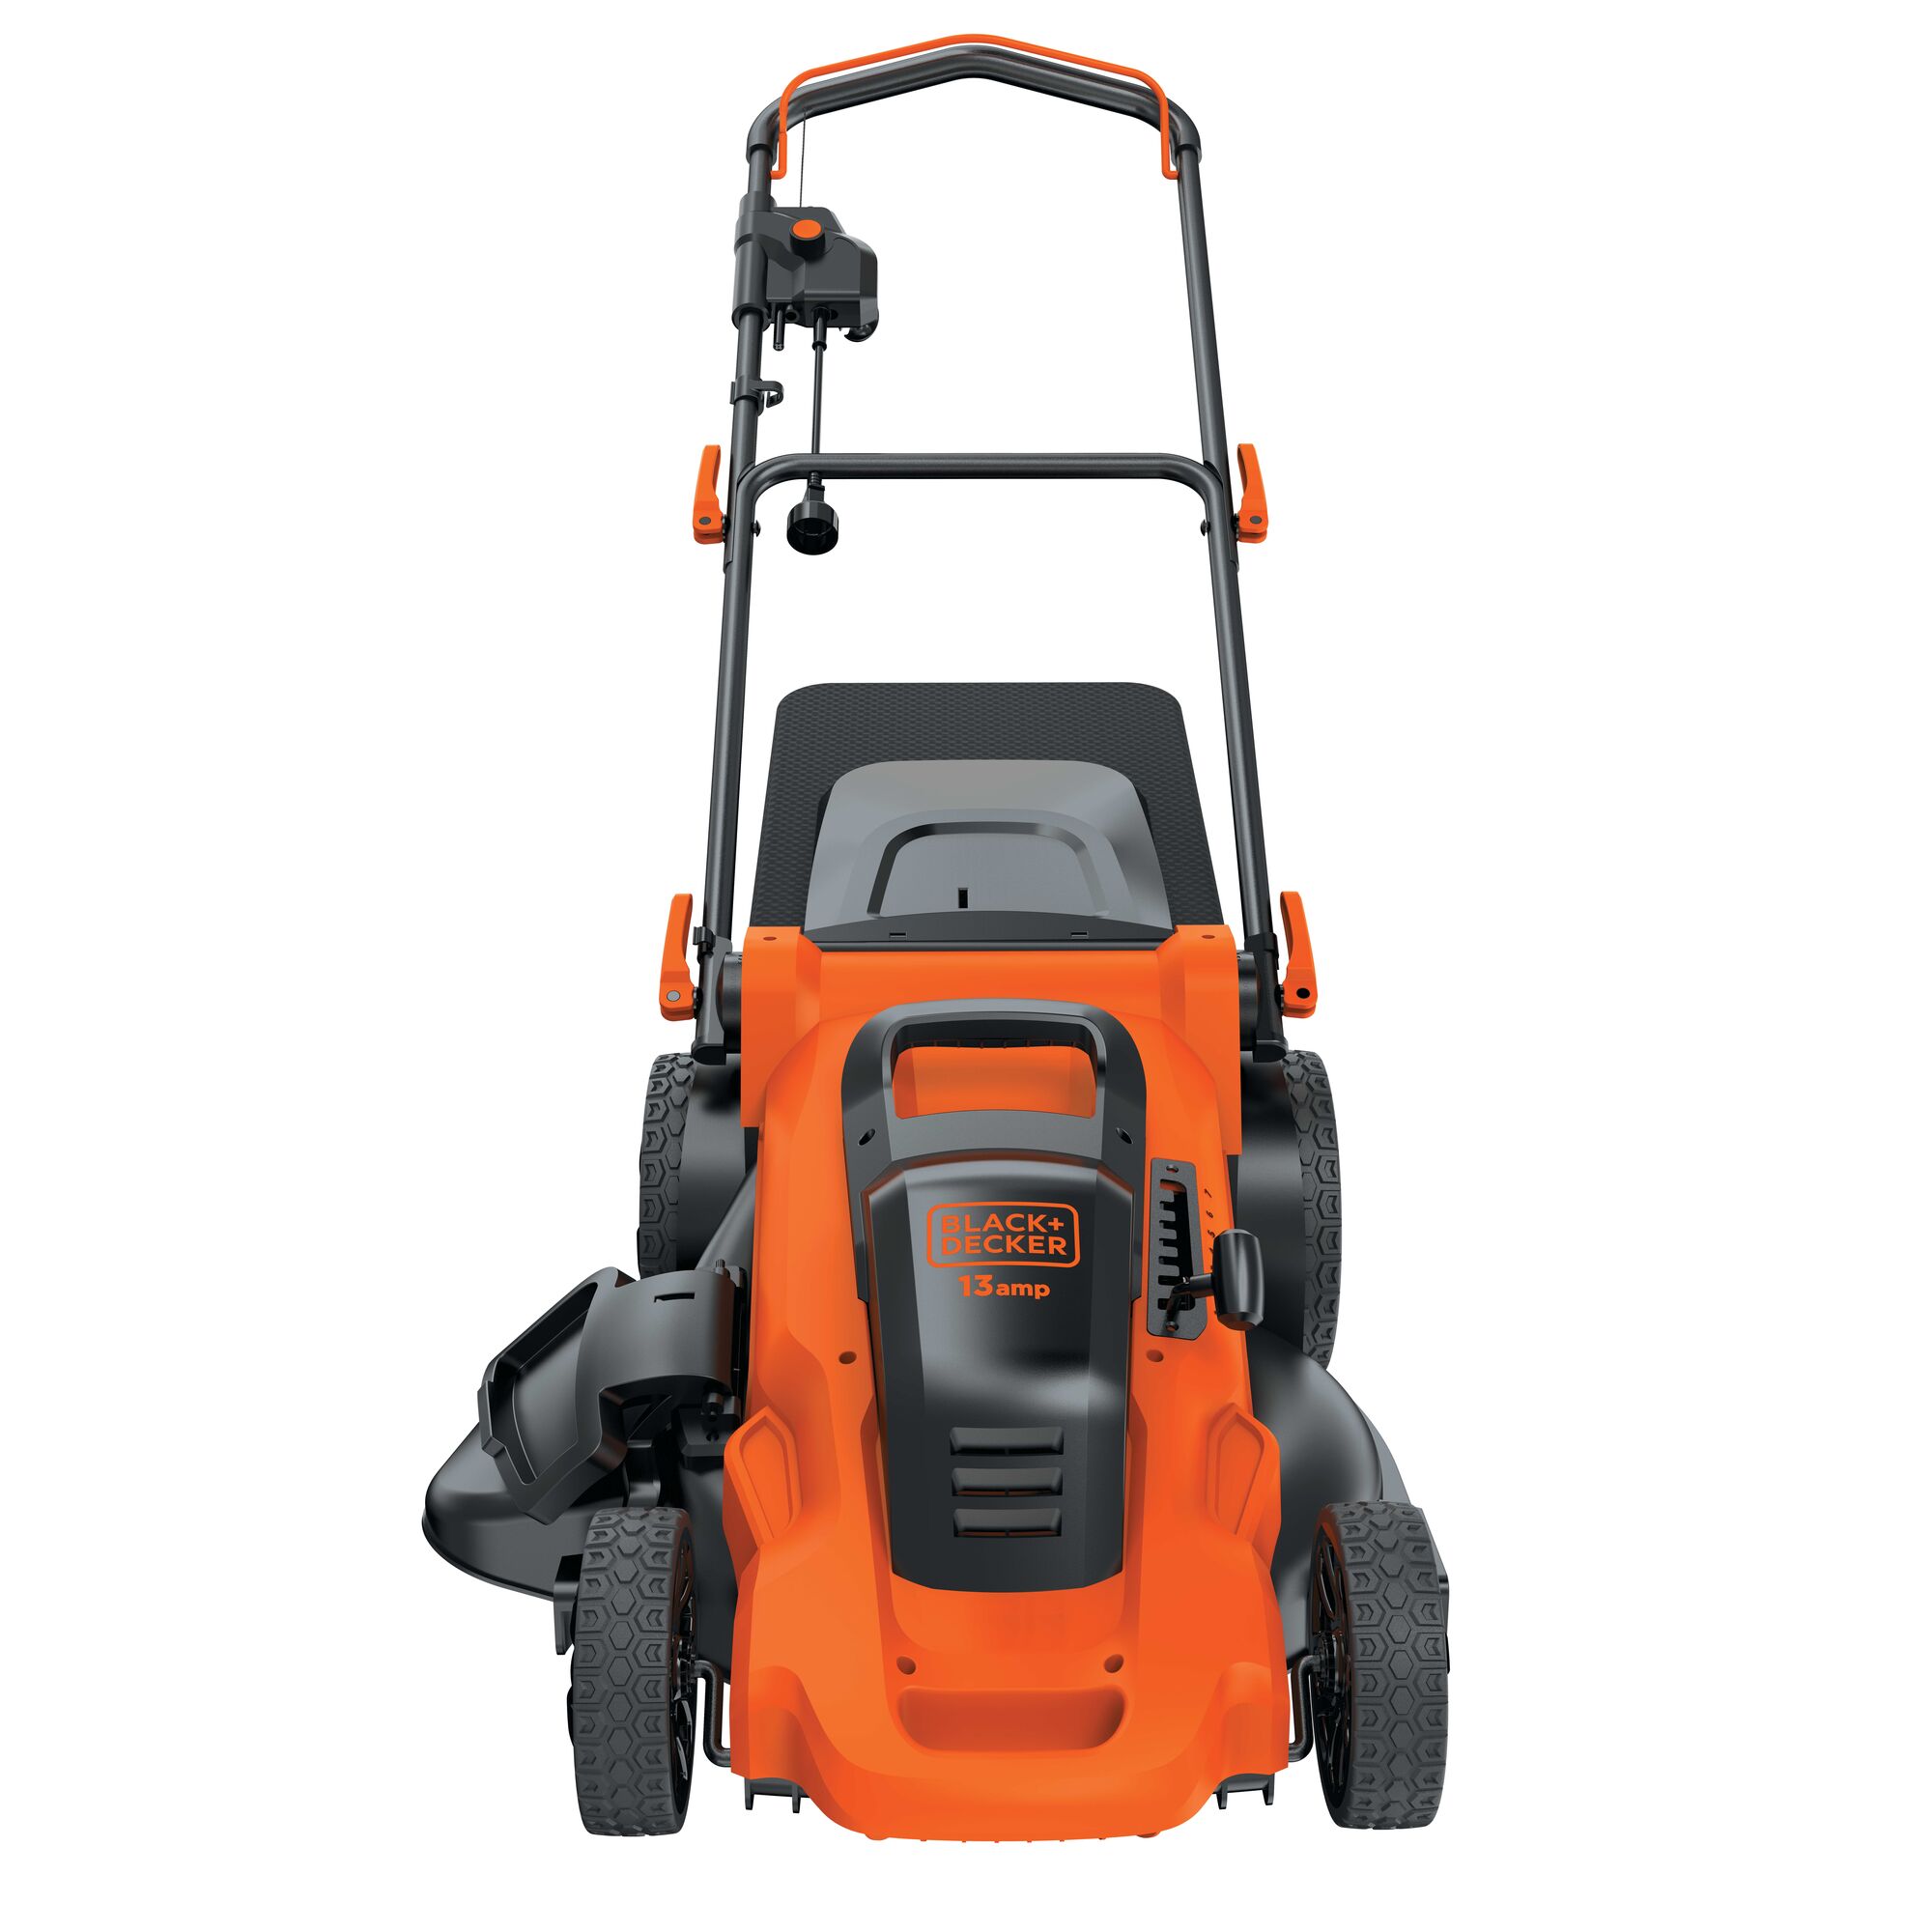 Front view of Corded Lawn Mower on white background.